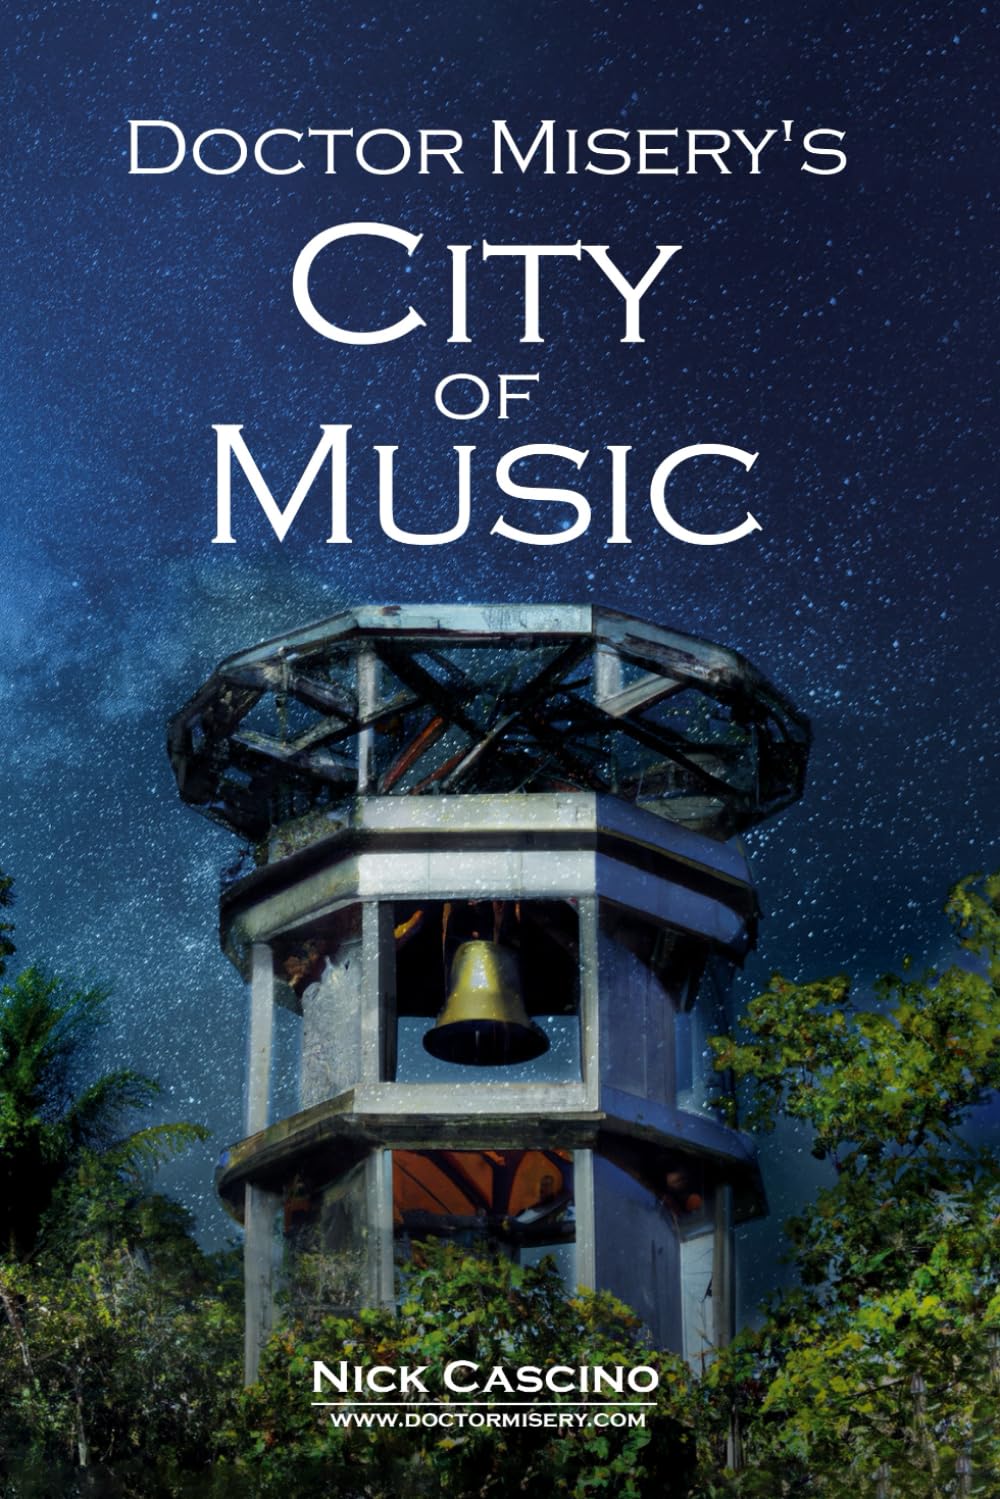 Nick Cascino Releases New Book - Doctor Misery's City of Music